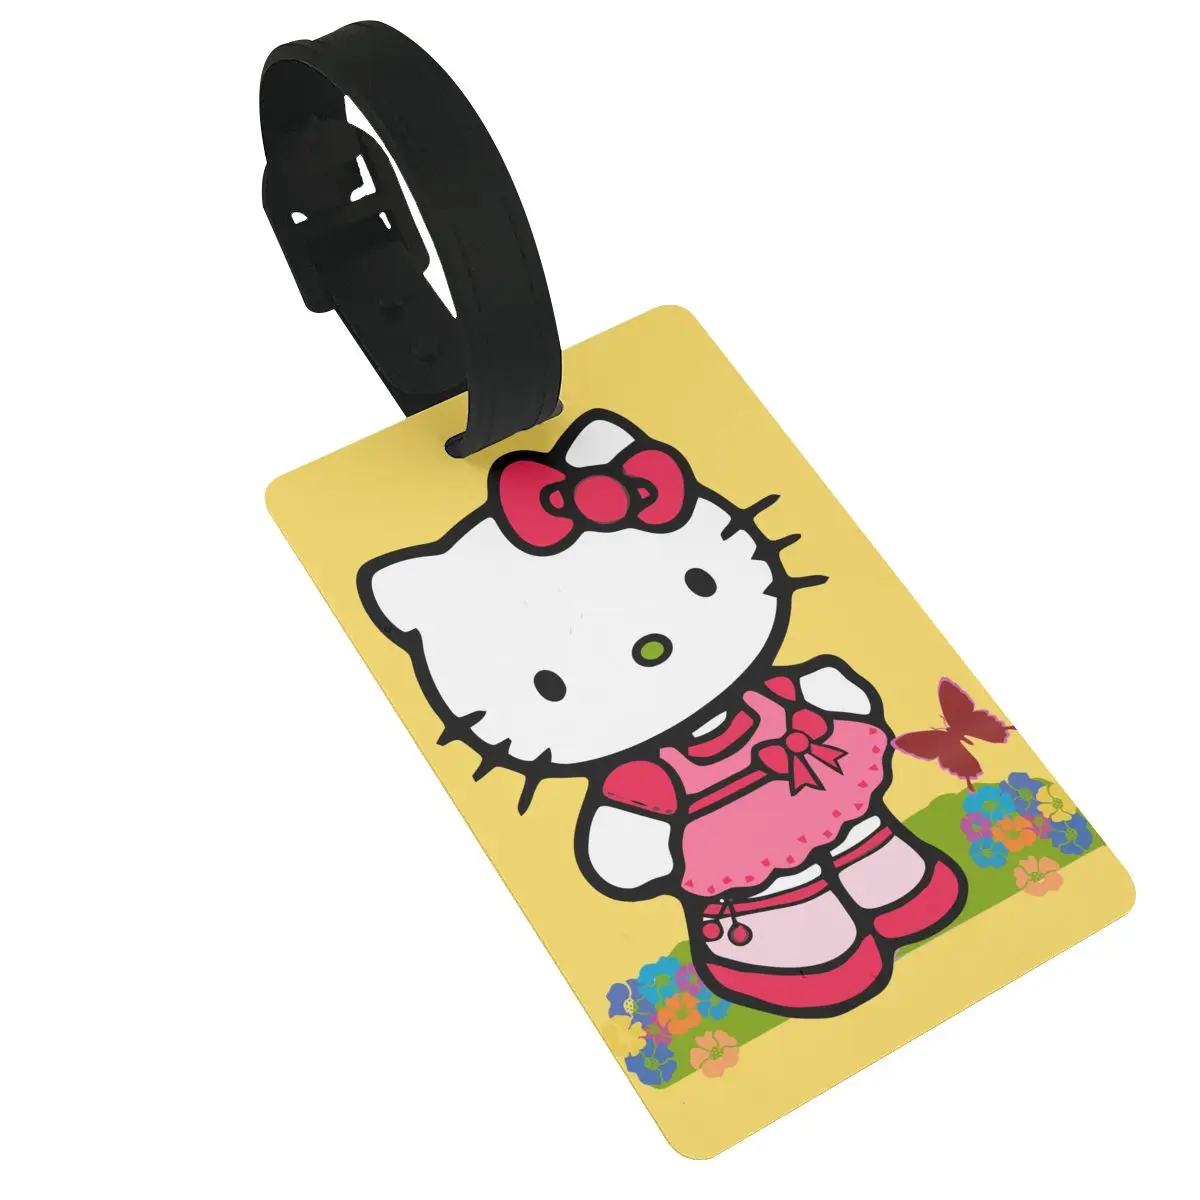 

PVC Cute Cartoon Luggage Tags Travel Accessories Suitcase Name Tag Label Baggage Boarding Name ID Address Bag Holder For kids